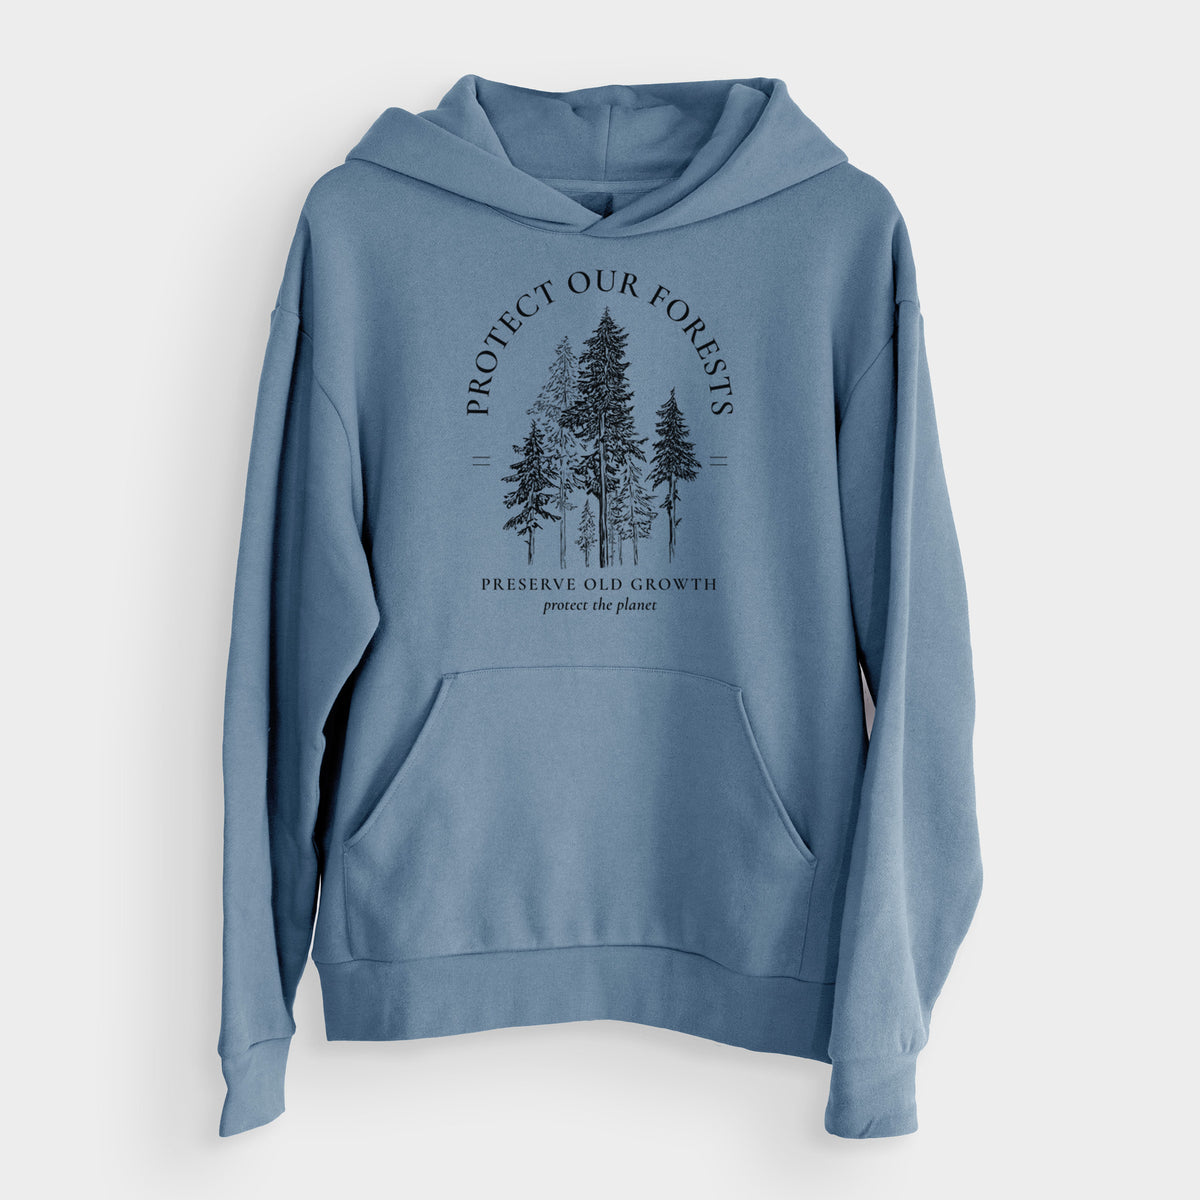 Protect our Forests - Preserve Old Growth  - Bodega Midweight Hoodie